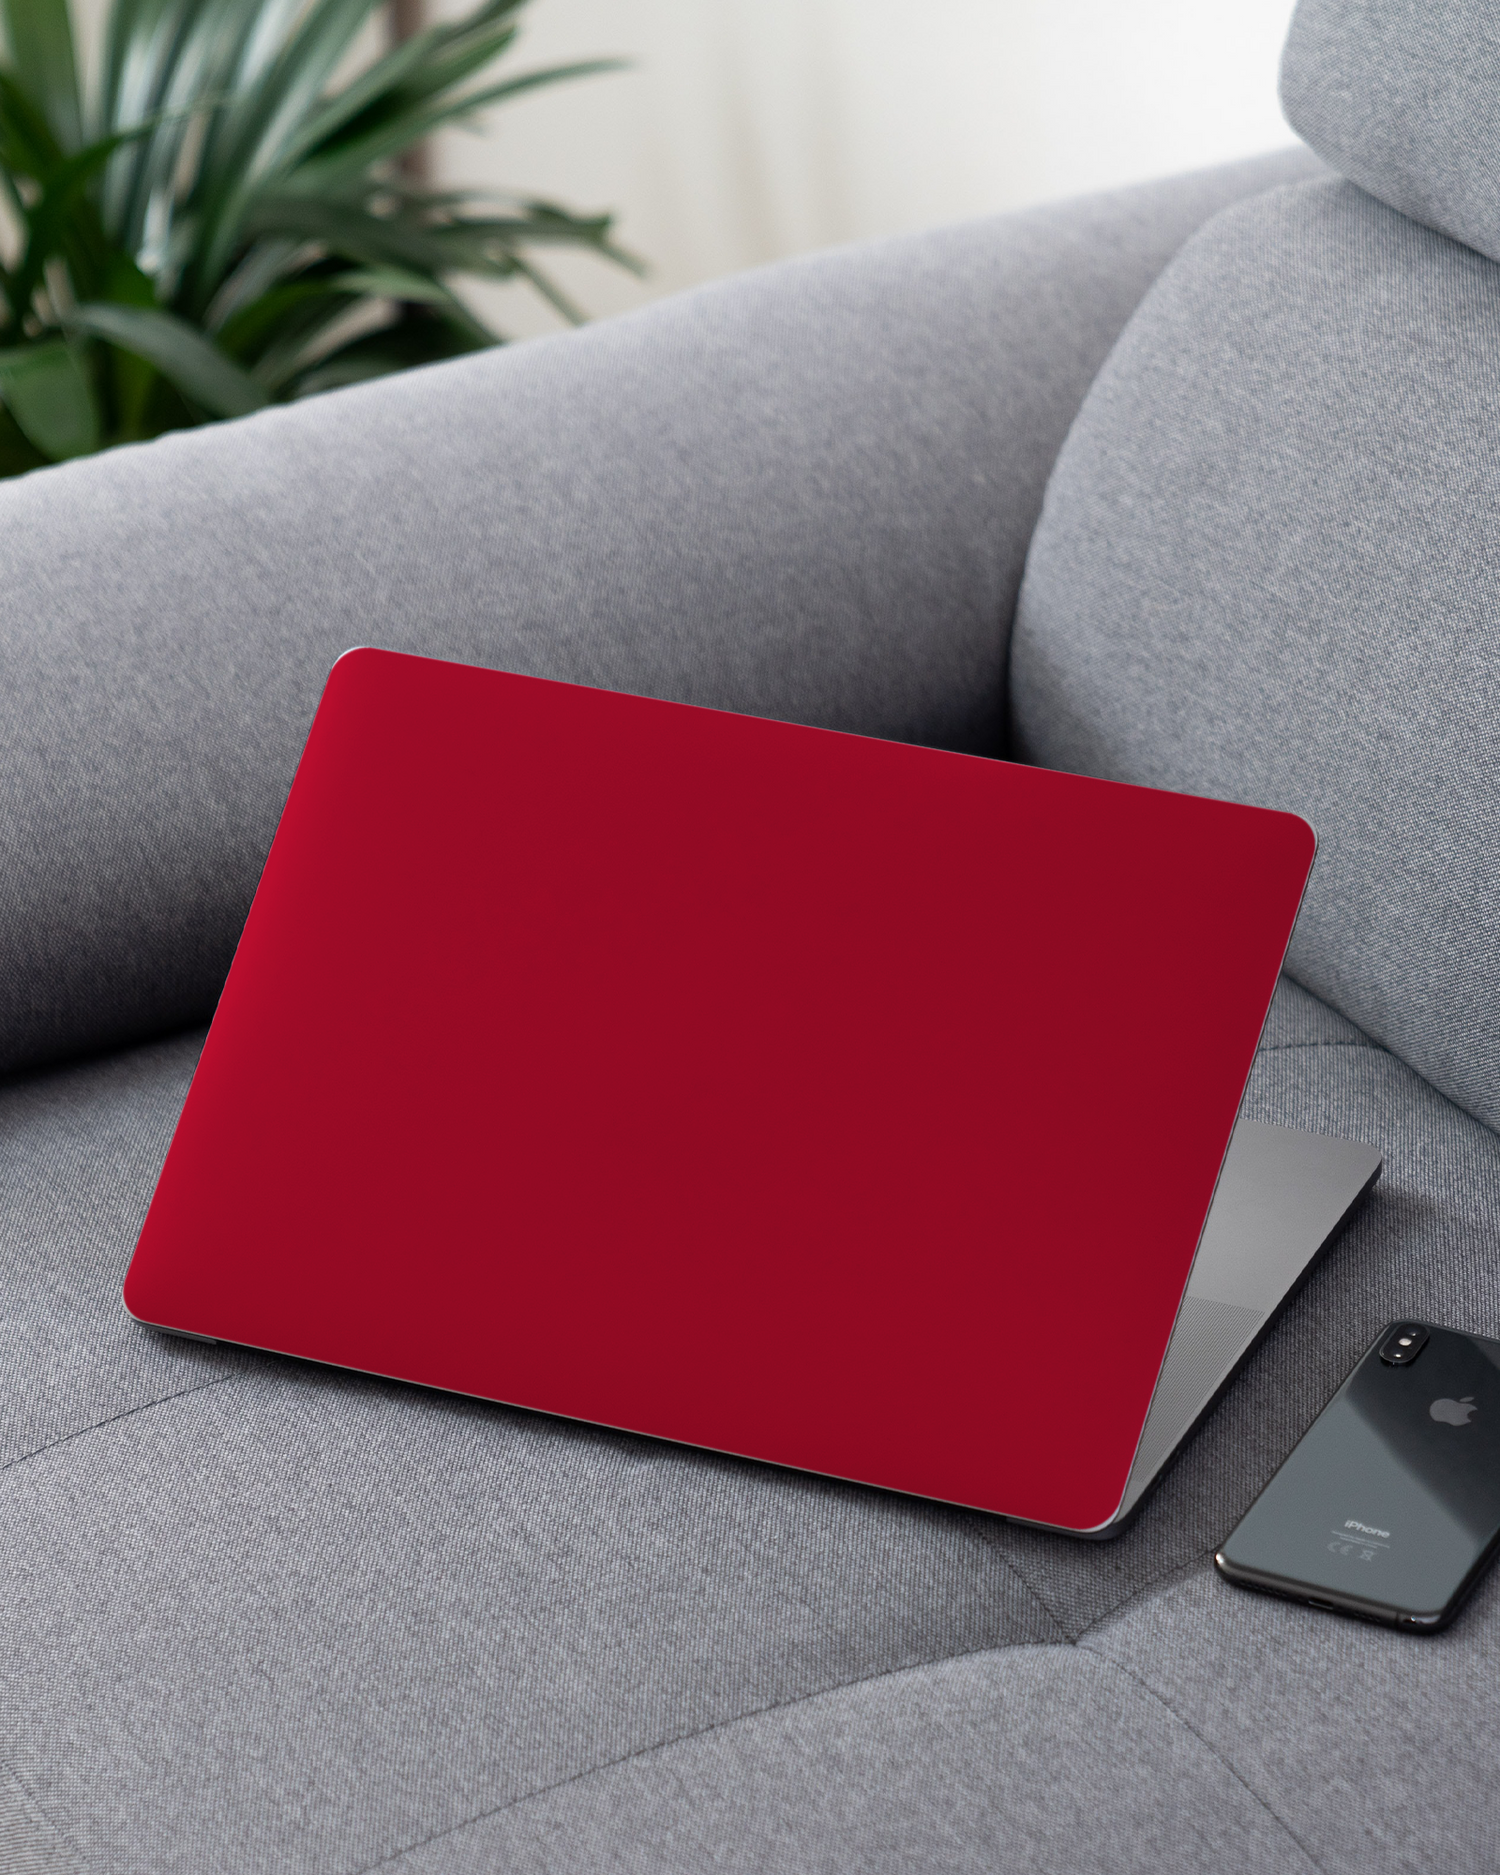 RED Laptop Skin for 13 inch Apple MacBooks on a couch